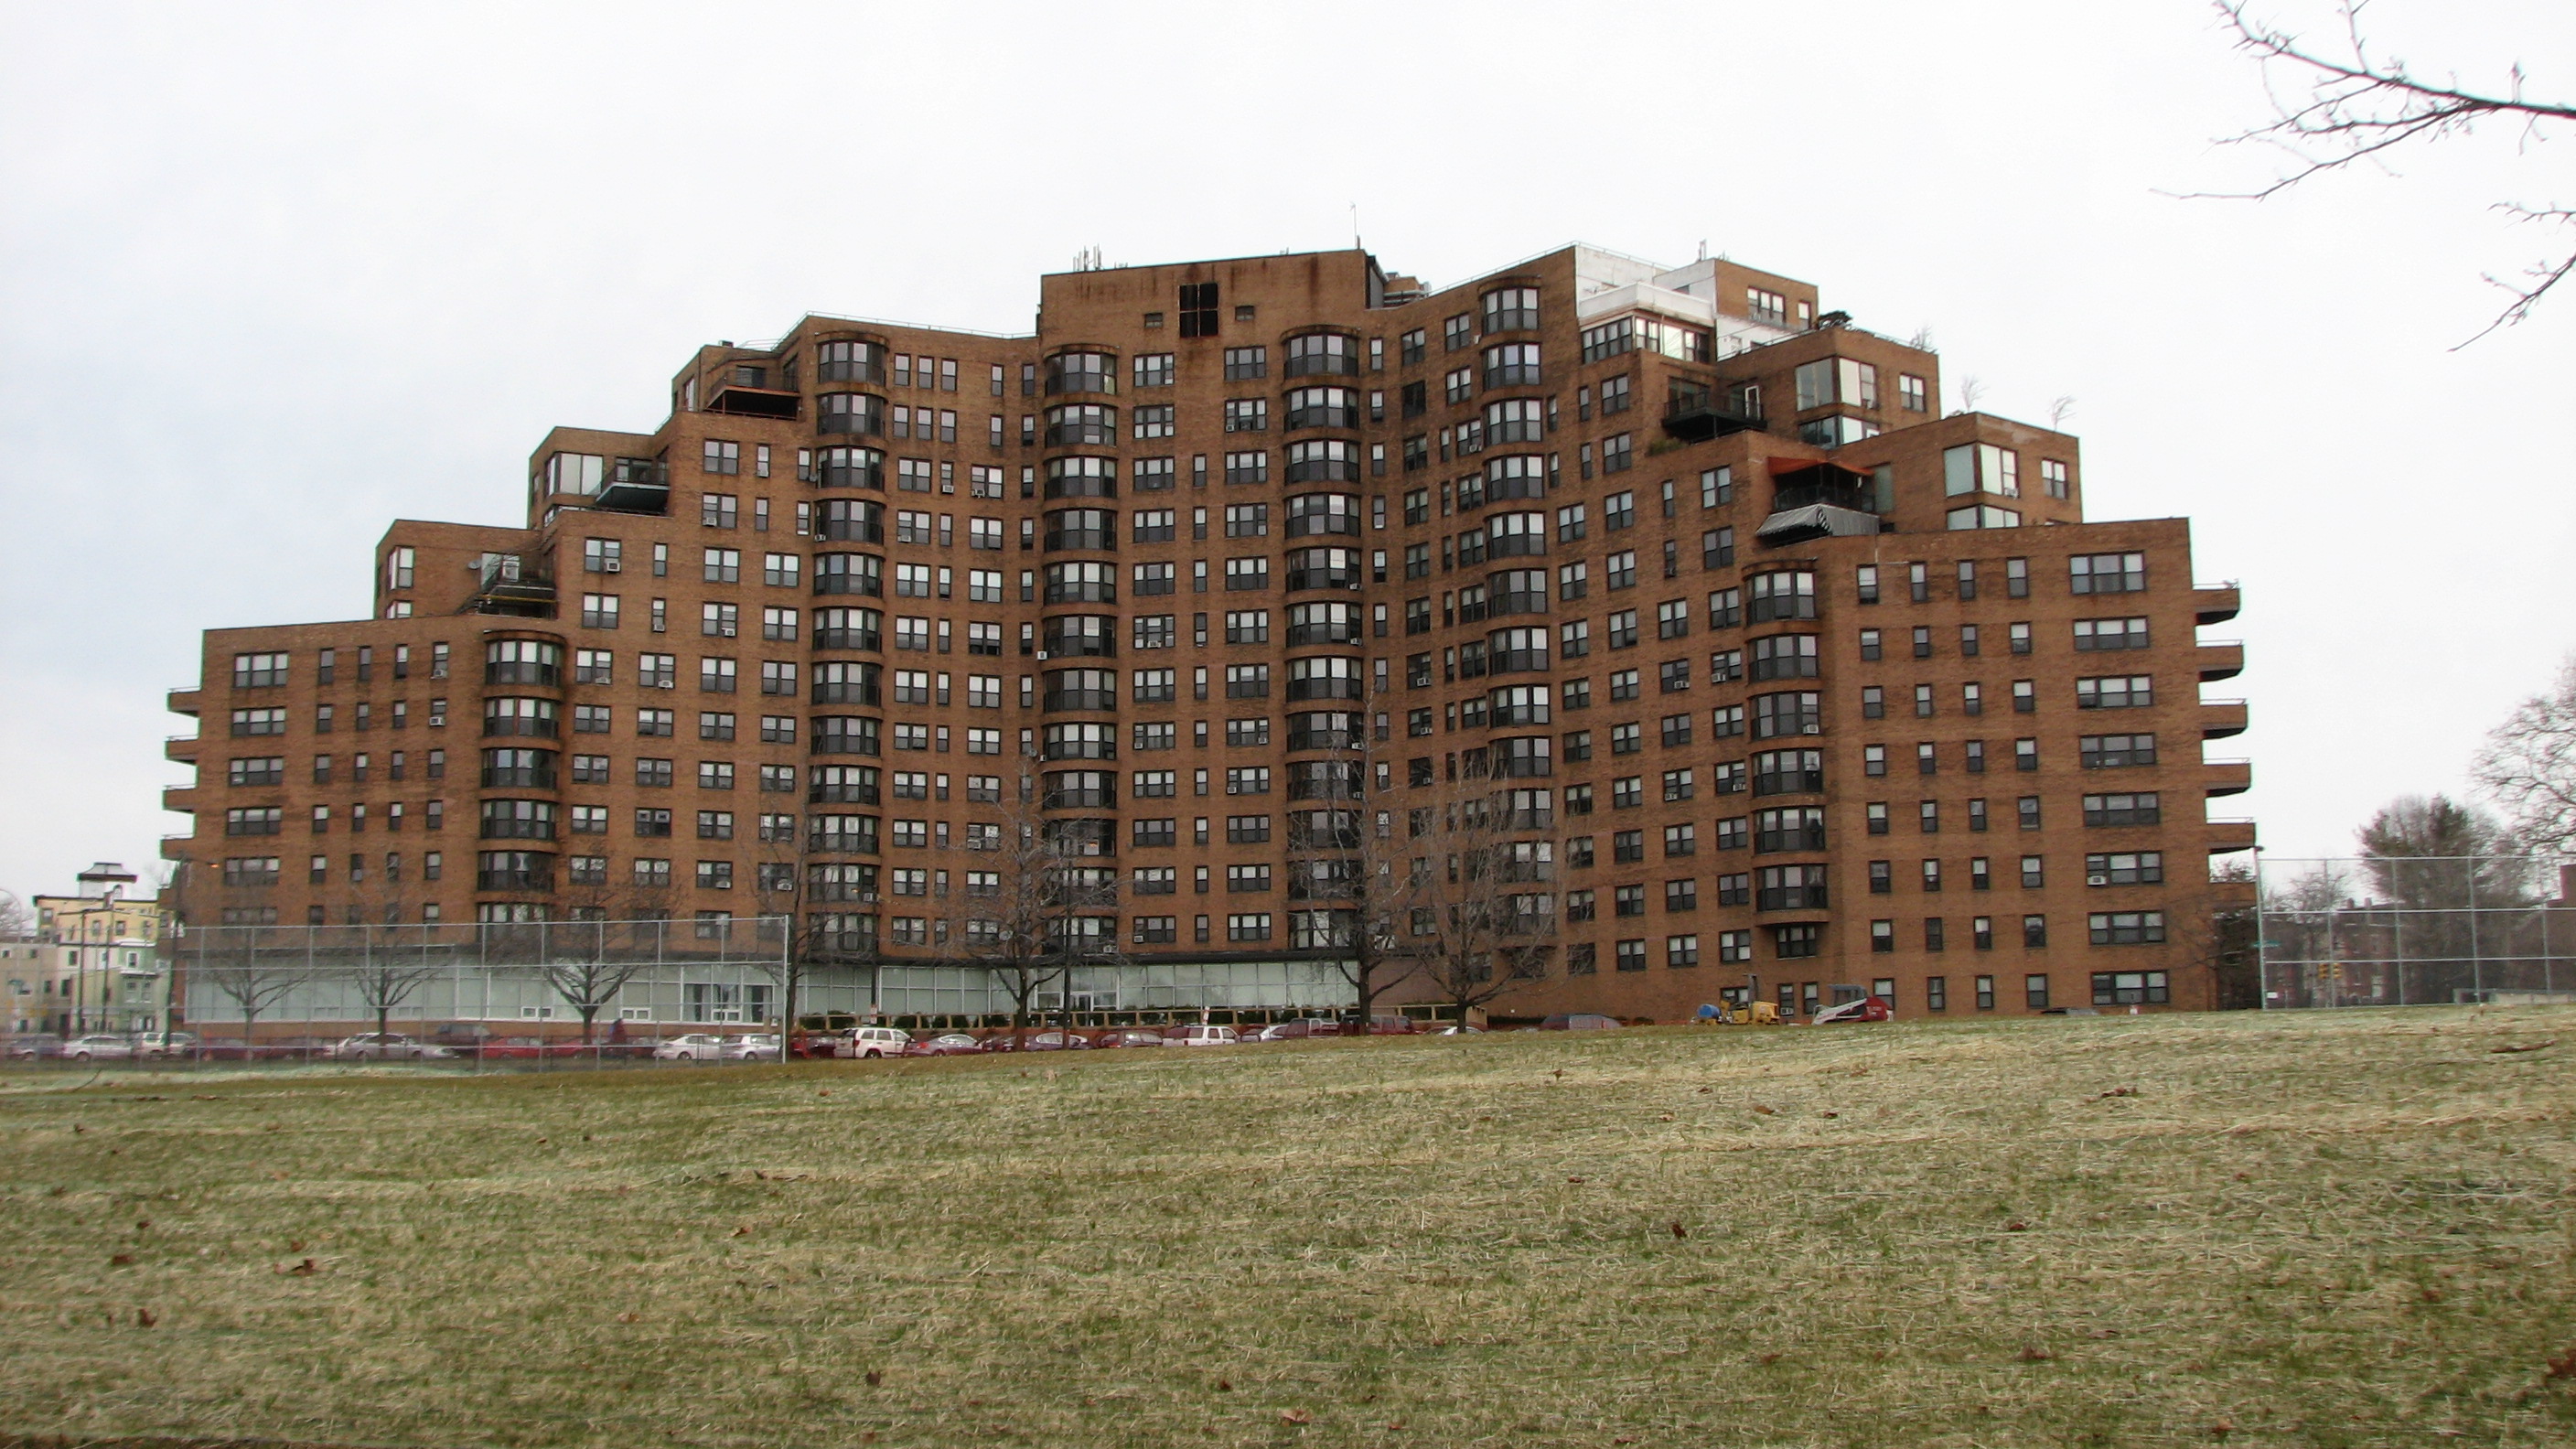 The Parkway House, 22nd and the Parkway, was one of the first post-war luxury apartment buildings in the city.